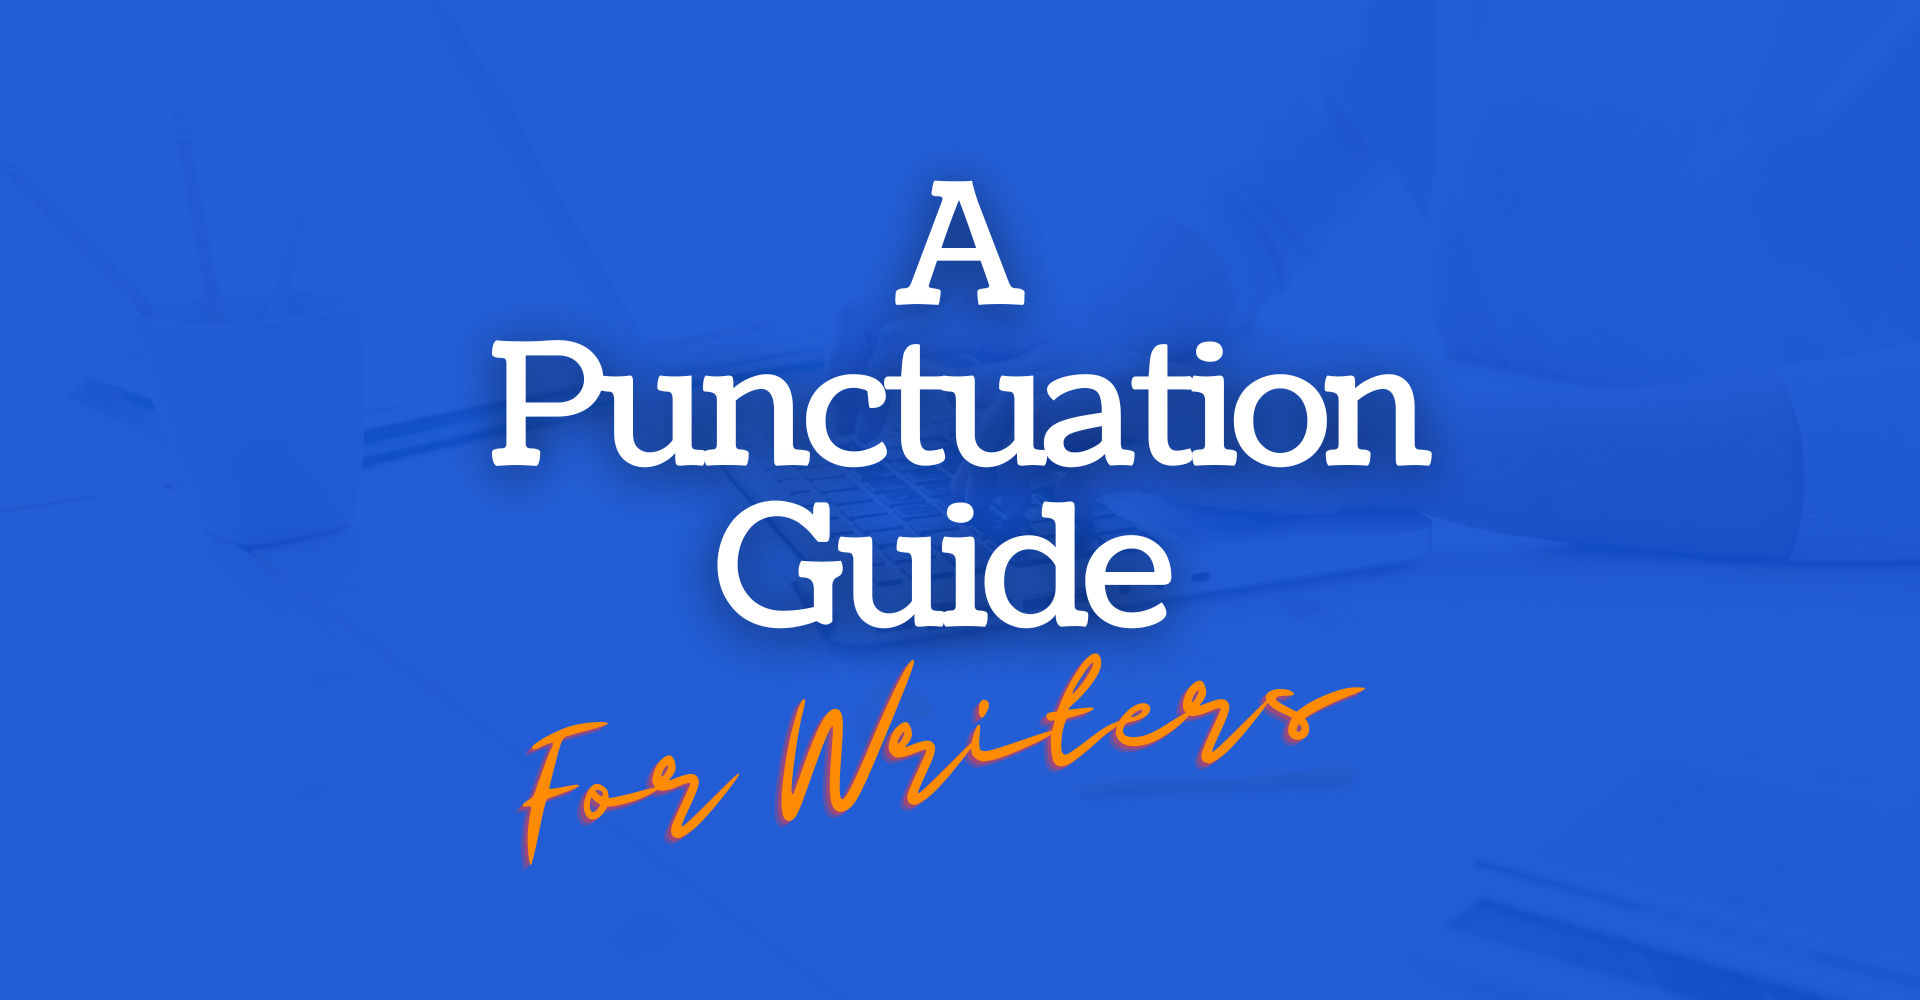 Shared Post A Punctuation Guide For Writers 9005